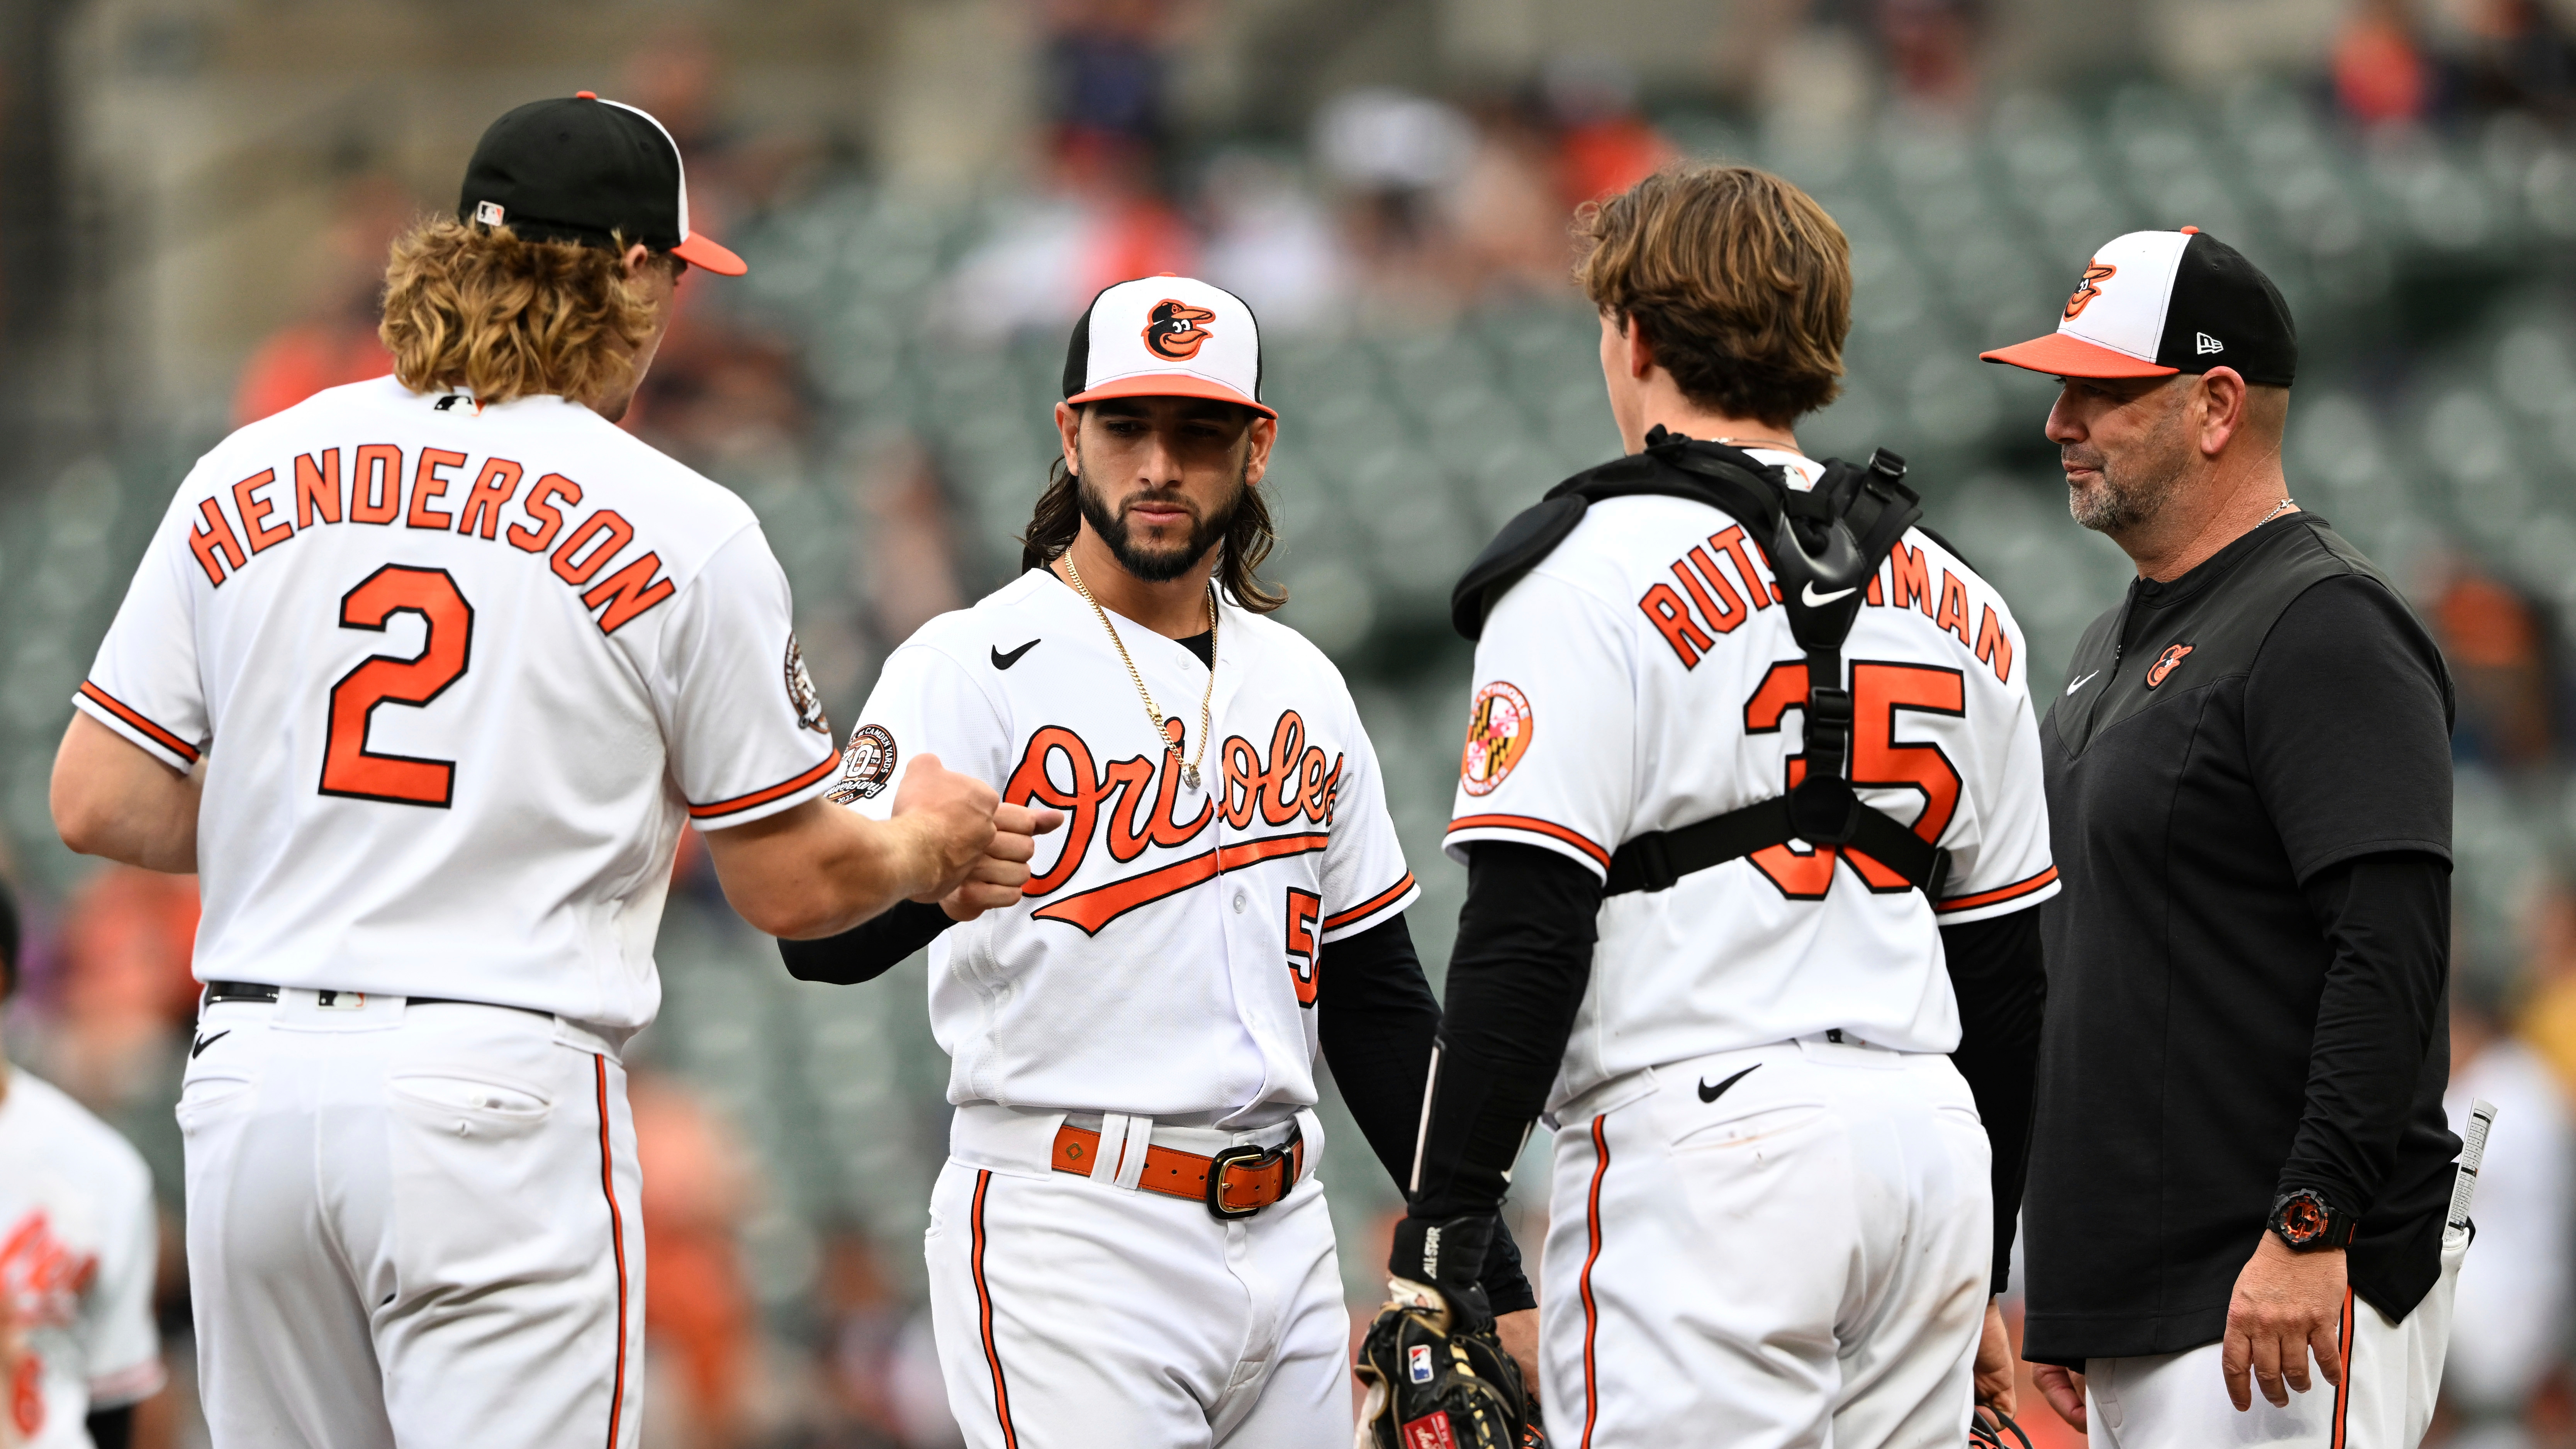 Baltimore Orioles Roster - 2023 Season - MLB Players & Starters 